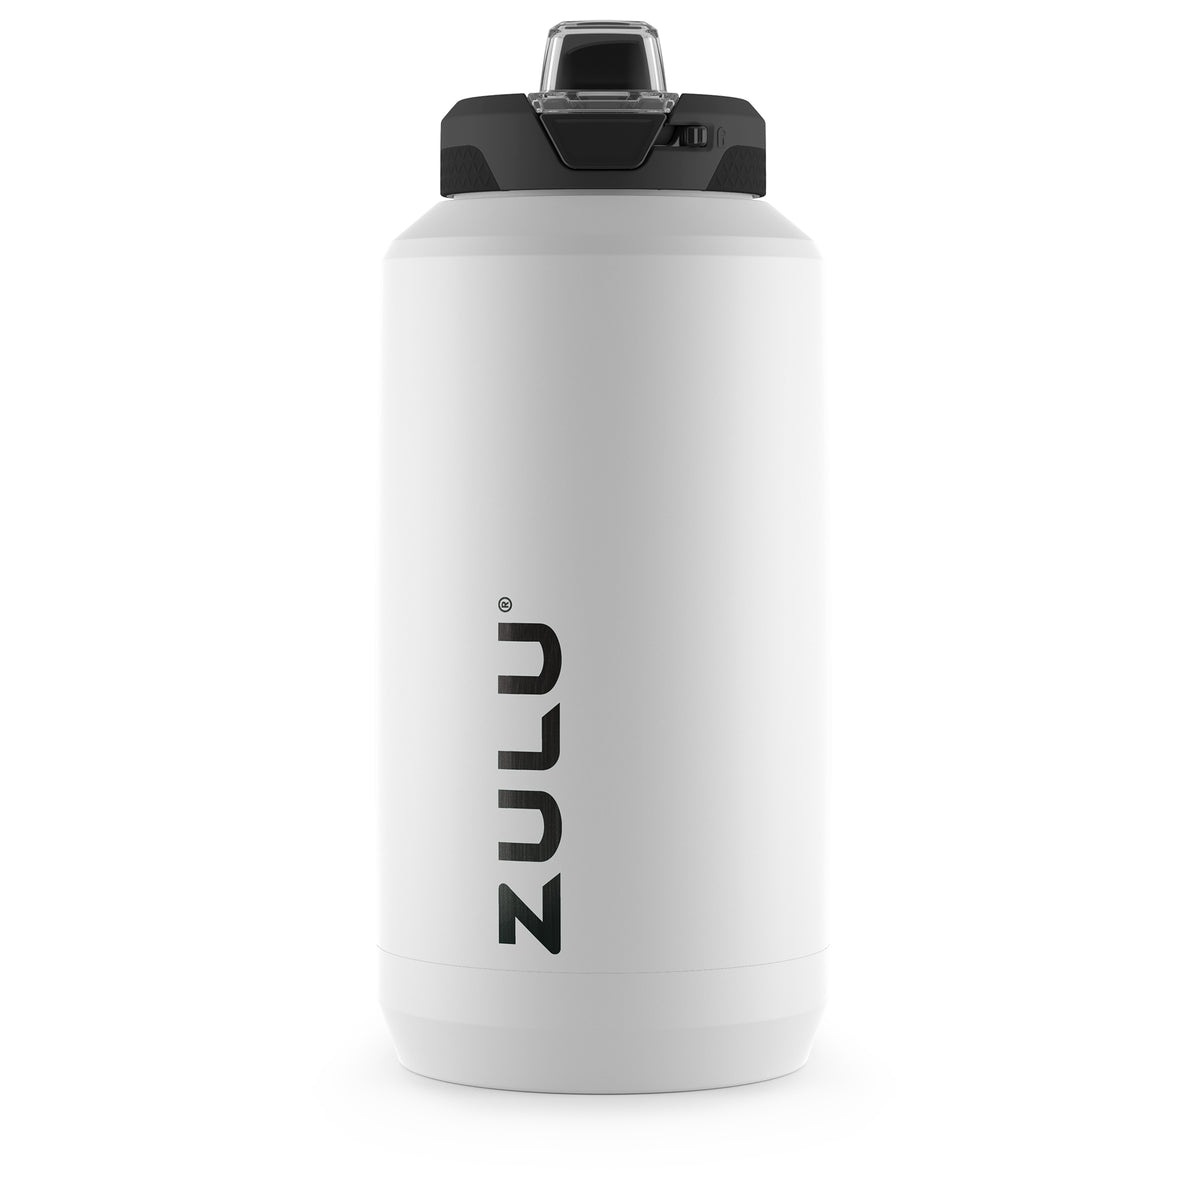  ZULU Goals 64oz Large Half Gallon Jug Water Bottle with  Motivational Time Marker, Covered Straw Spout and Carrying Handle, Perfect  for Gym, Home, and Sports, Grey : Sports & Outdoors